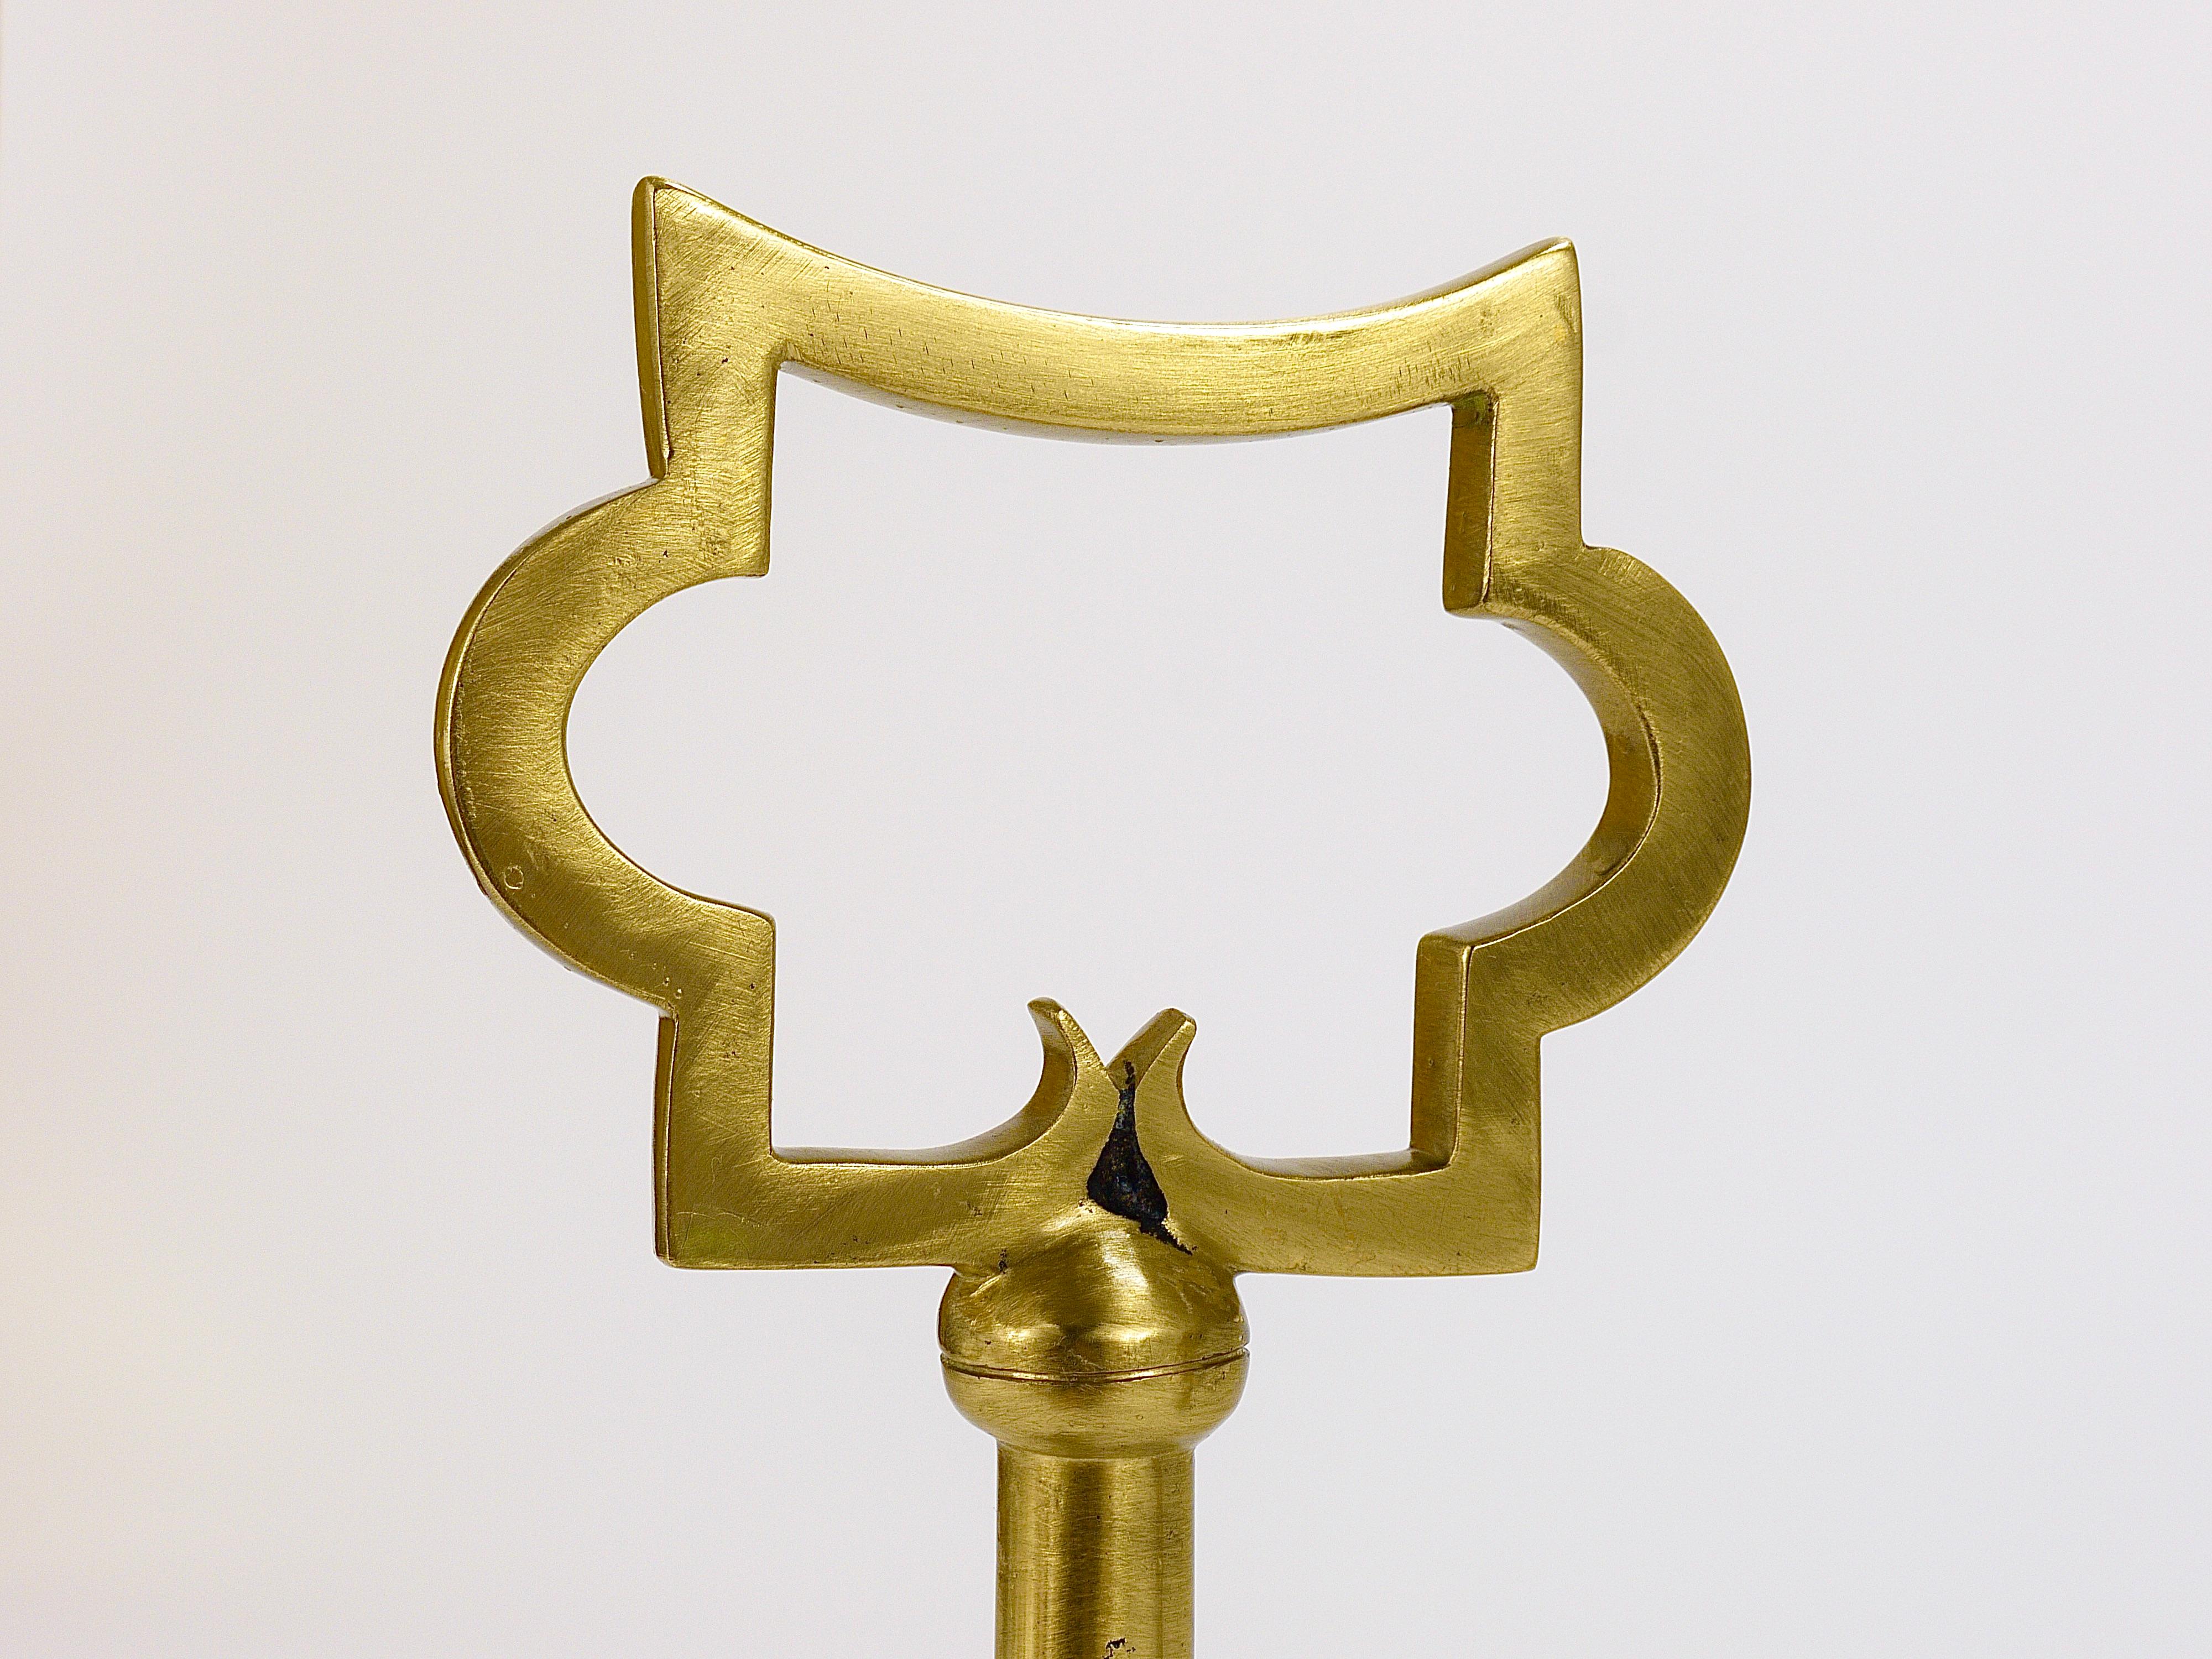 Sculptural Austrian Midcentury Brass Key Book Ends from the, 1950s For Sale 10